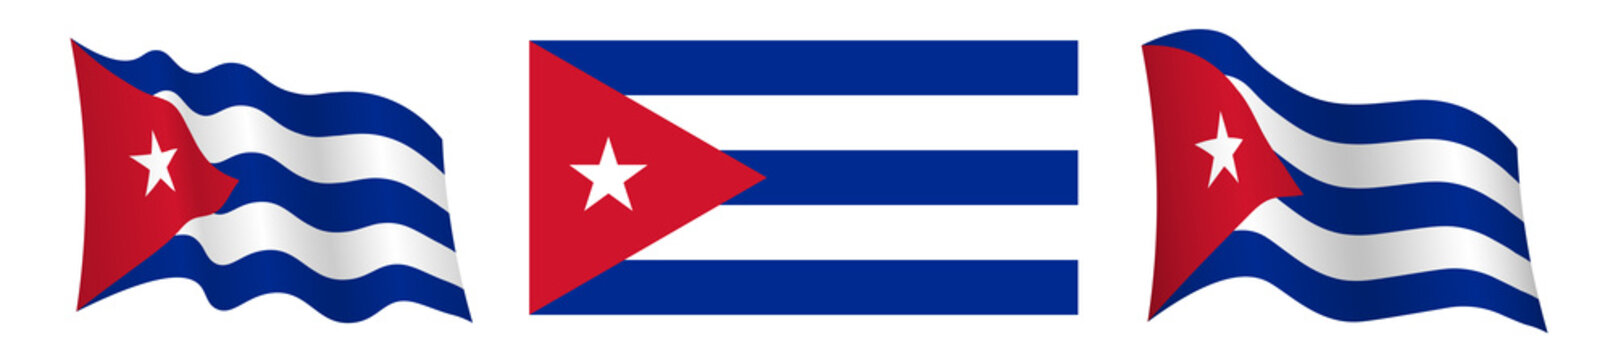 flag of Cuba in static position and in motion, fluttering in wind in exact colors and sizes, on white background